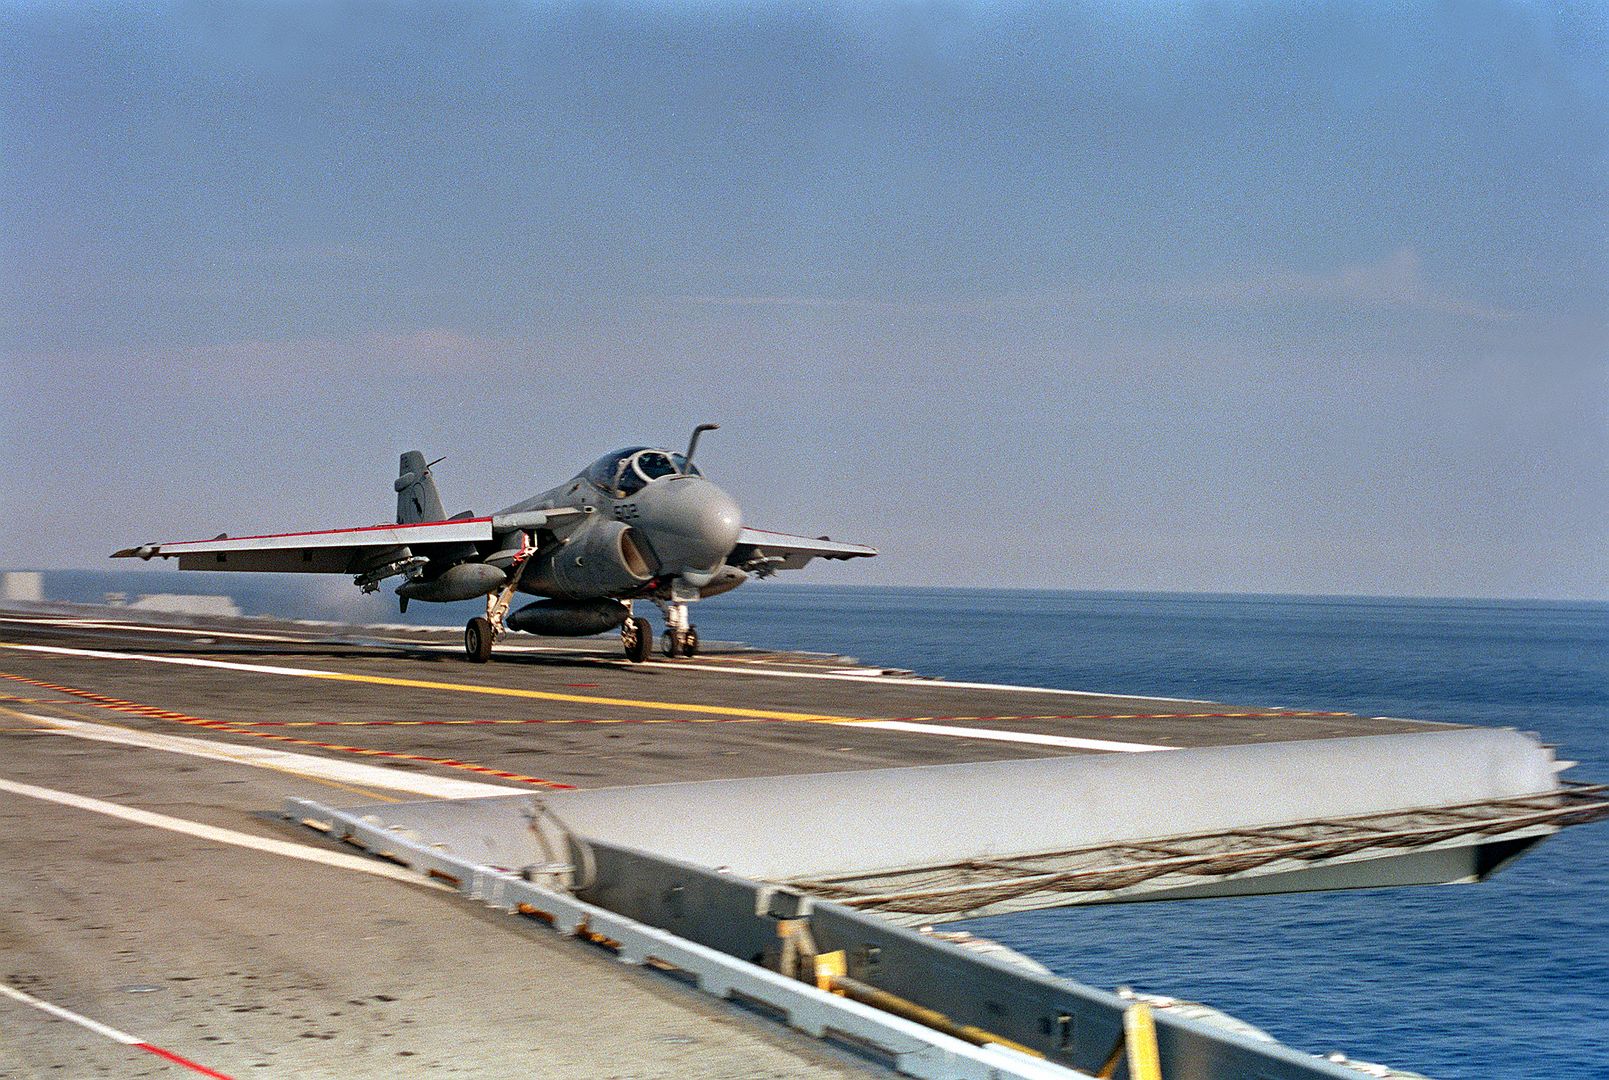 An A 6E Intruder Aircraft Of Attack Squadron 35 Is Launched During Flight Operations Aboard The Aircraft Carrier USS SARATOGA